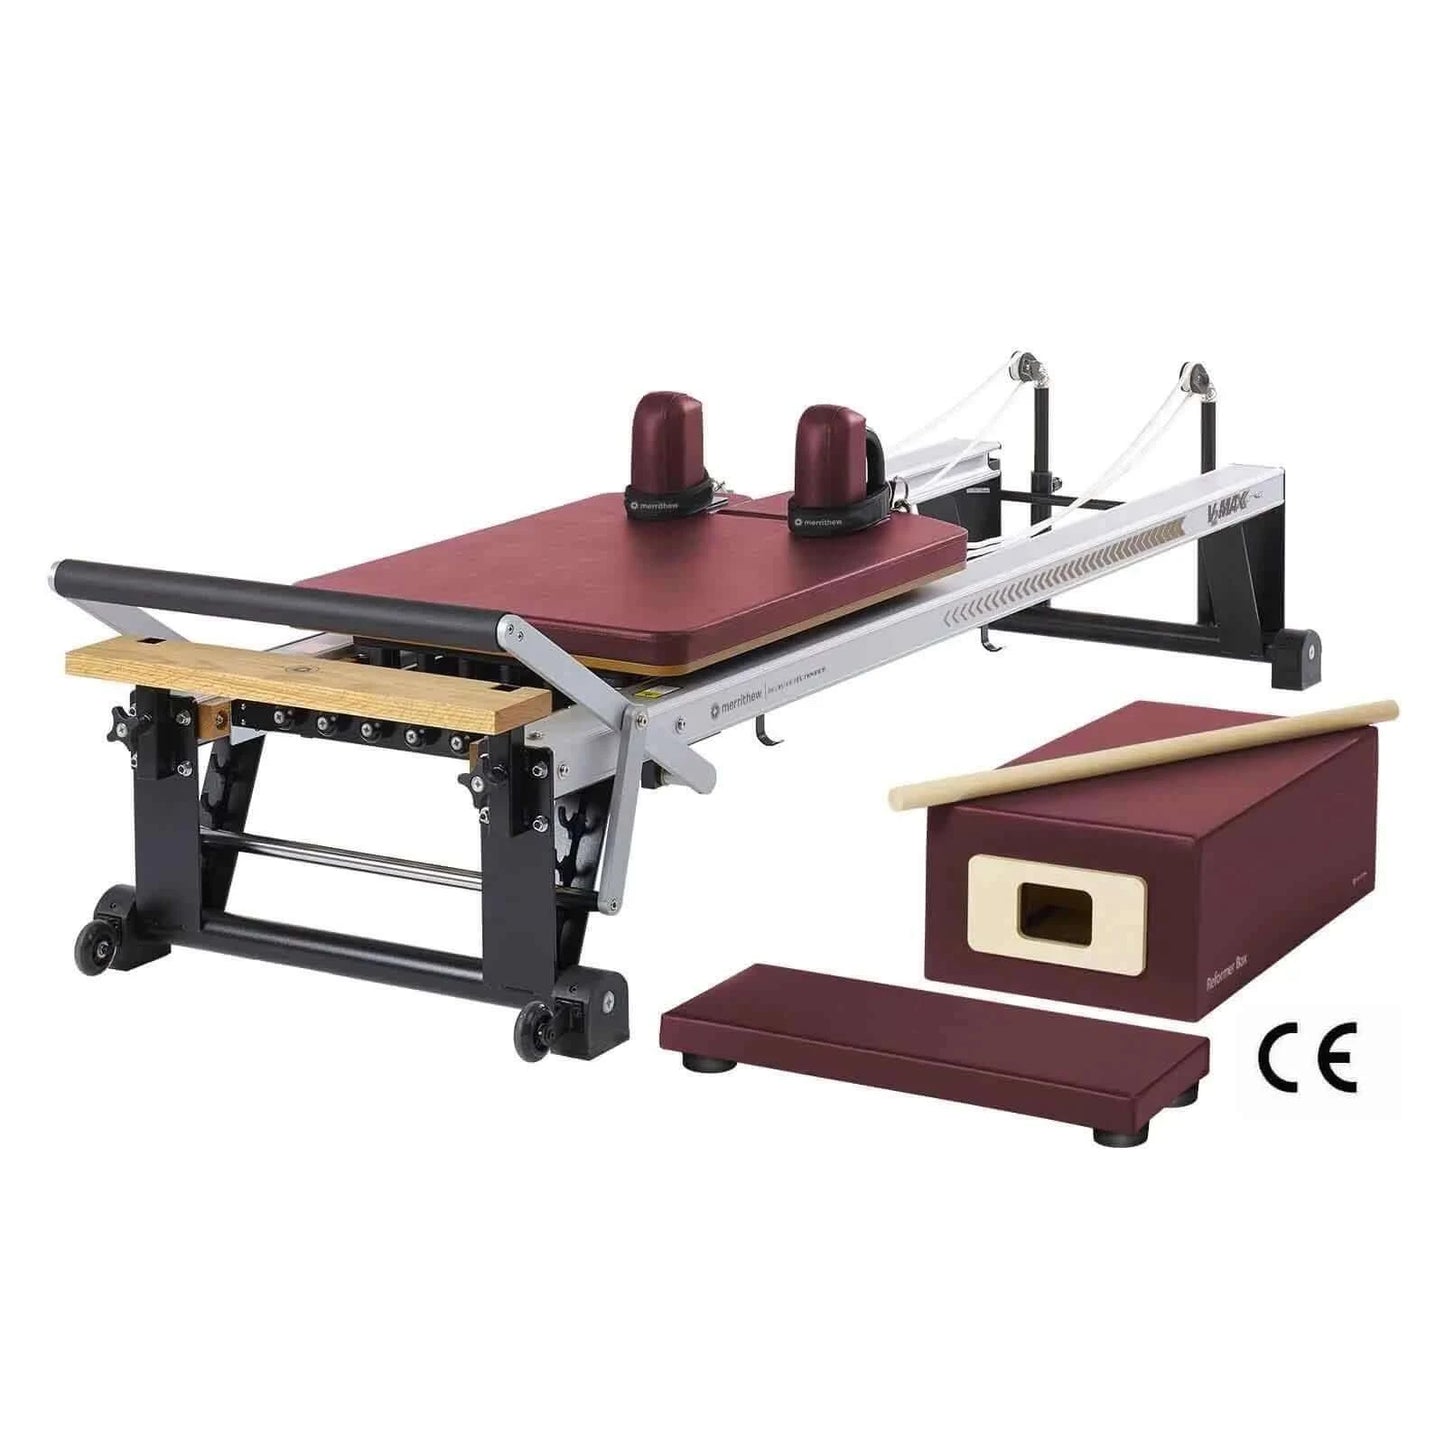 Siera Brick Merrithew™ Pilates V2 Max™ Reformer Bundle by Merrithew™ sold by Pilates Matters® by BSP LLC